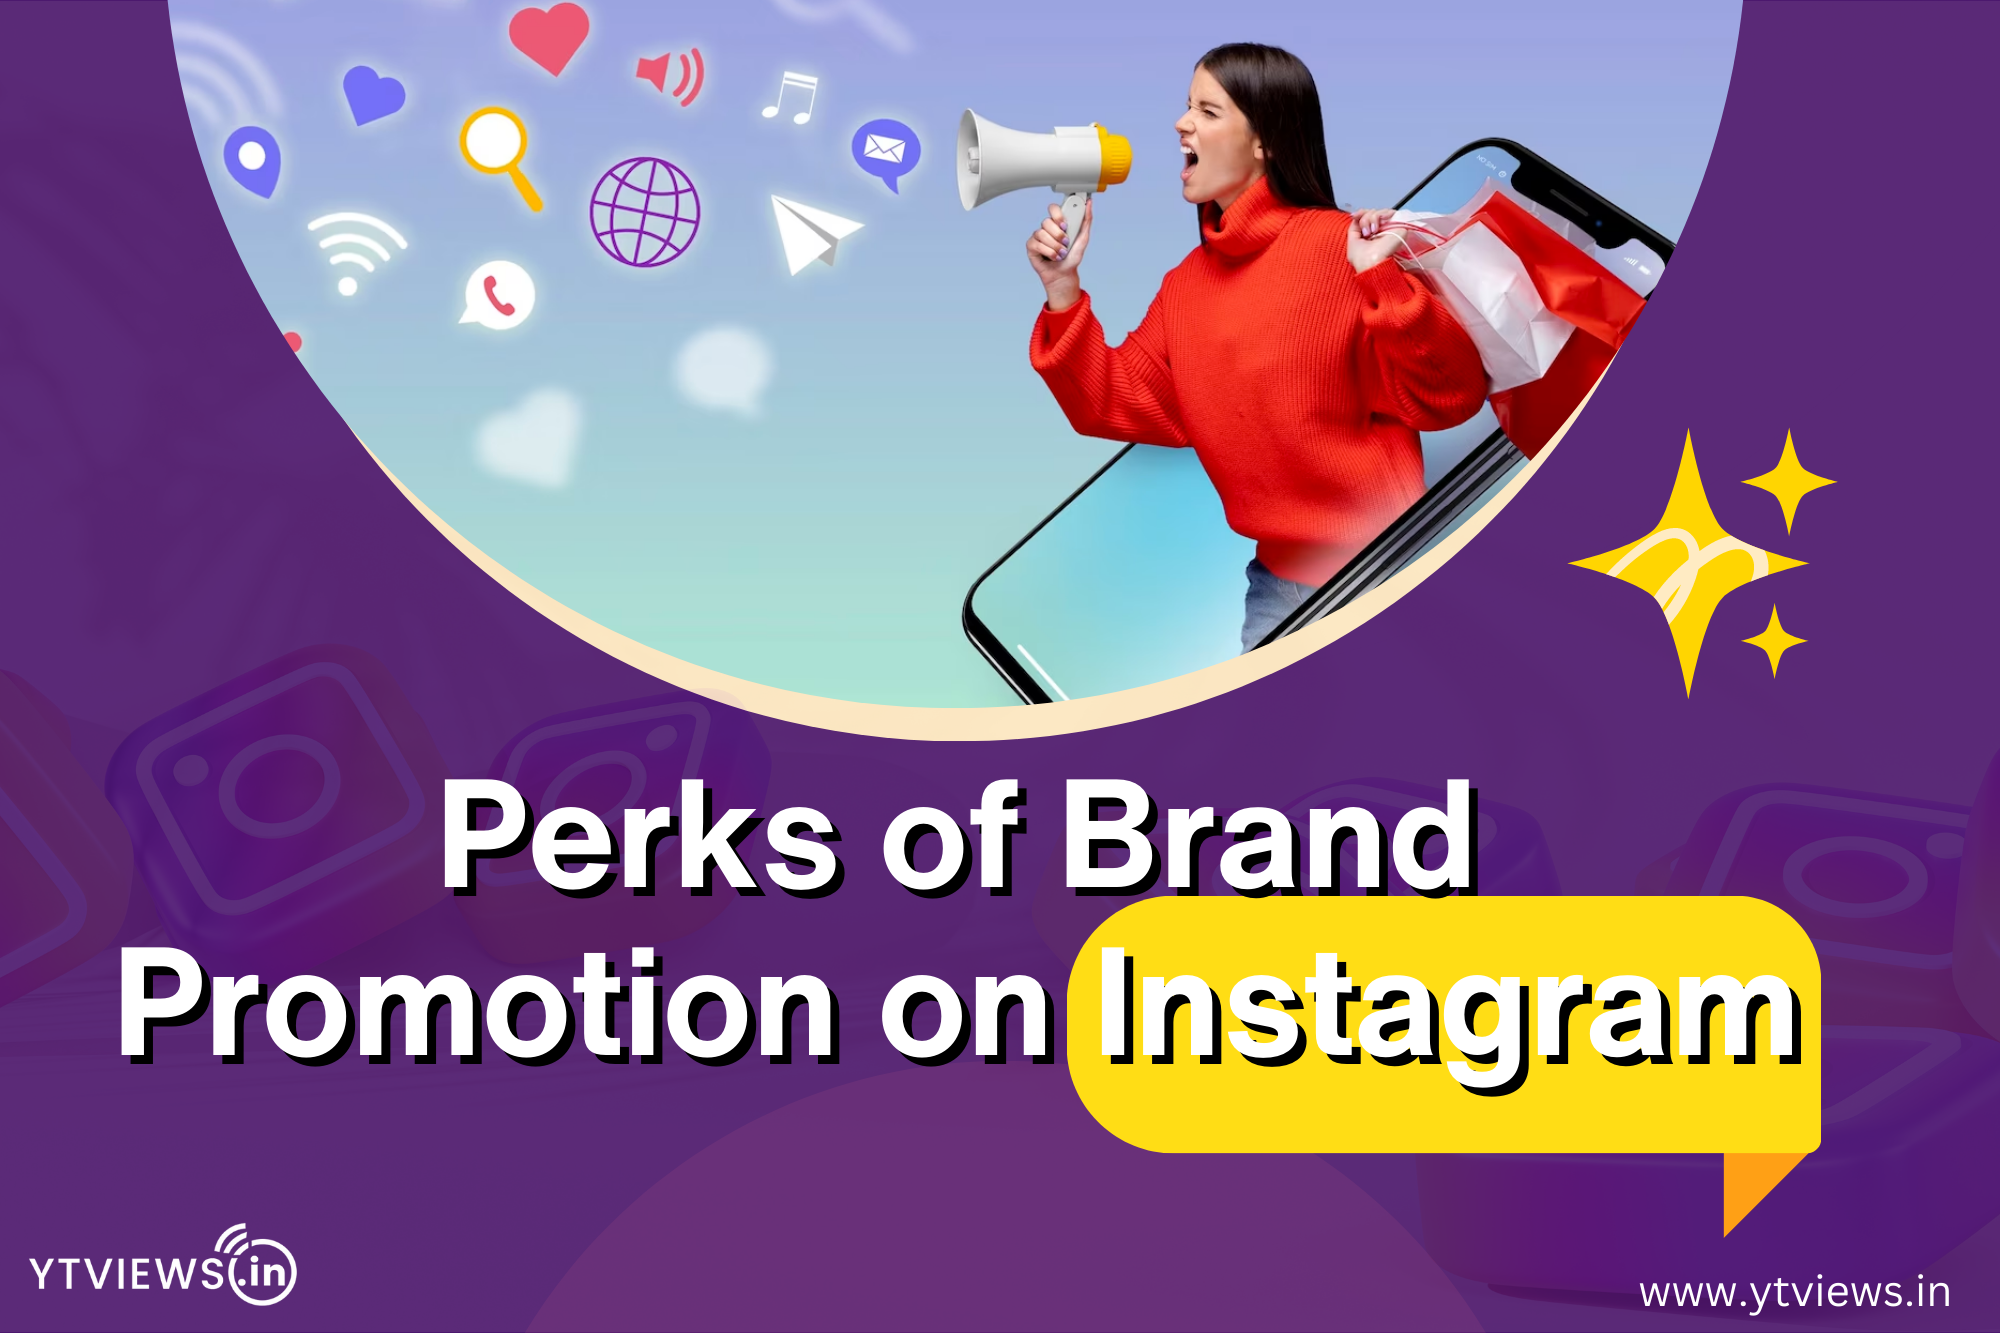 “Maximizing Your Business’s Potential: The Benefits of Promoting Your Brand on Instagram.”